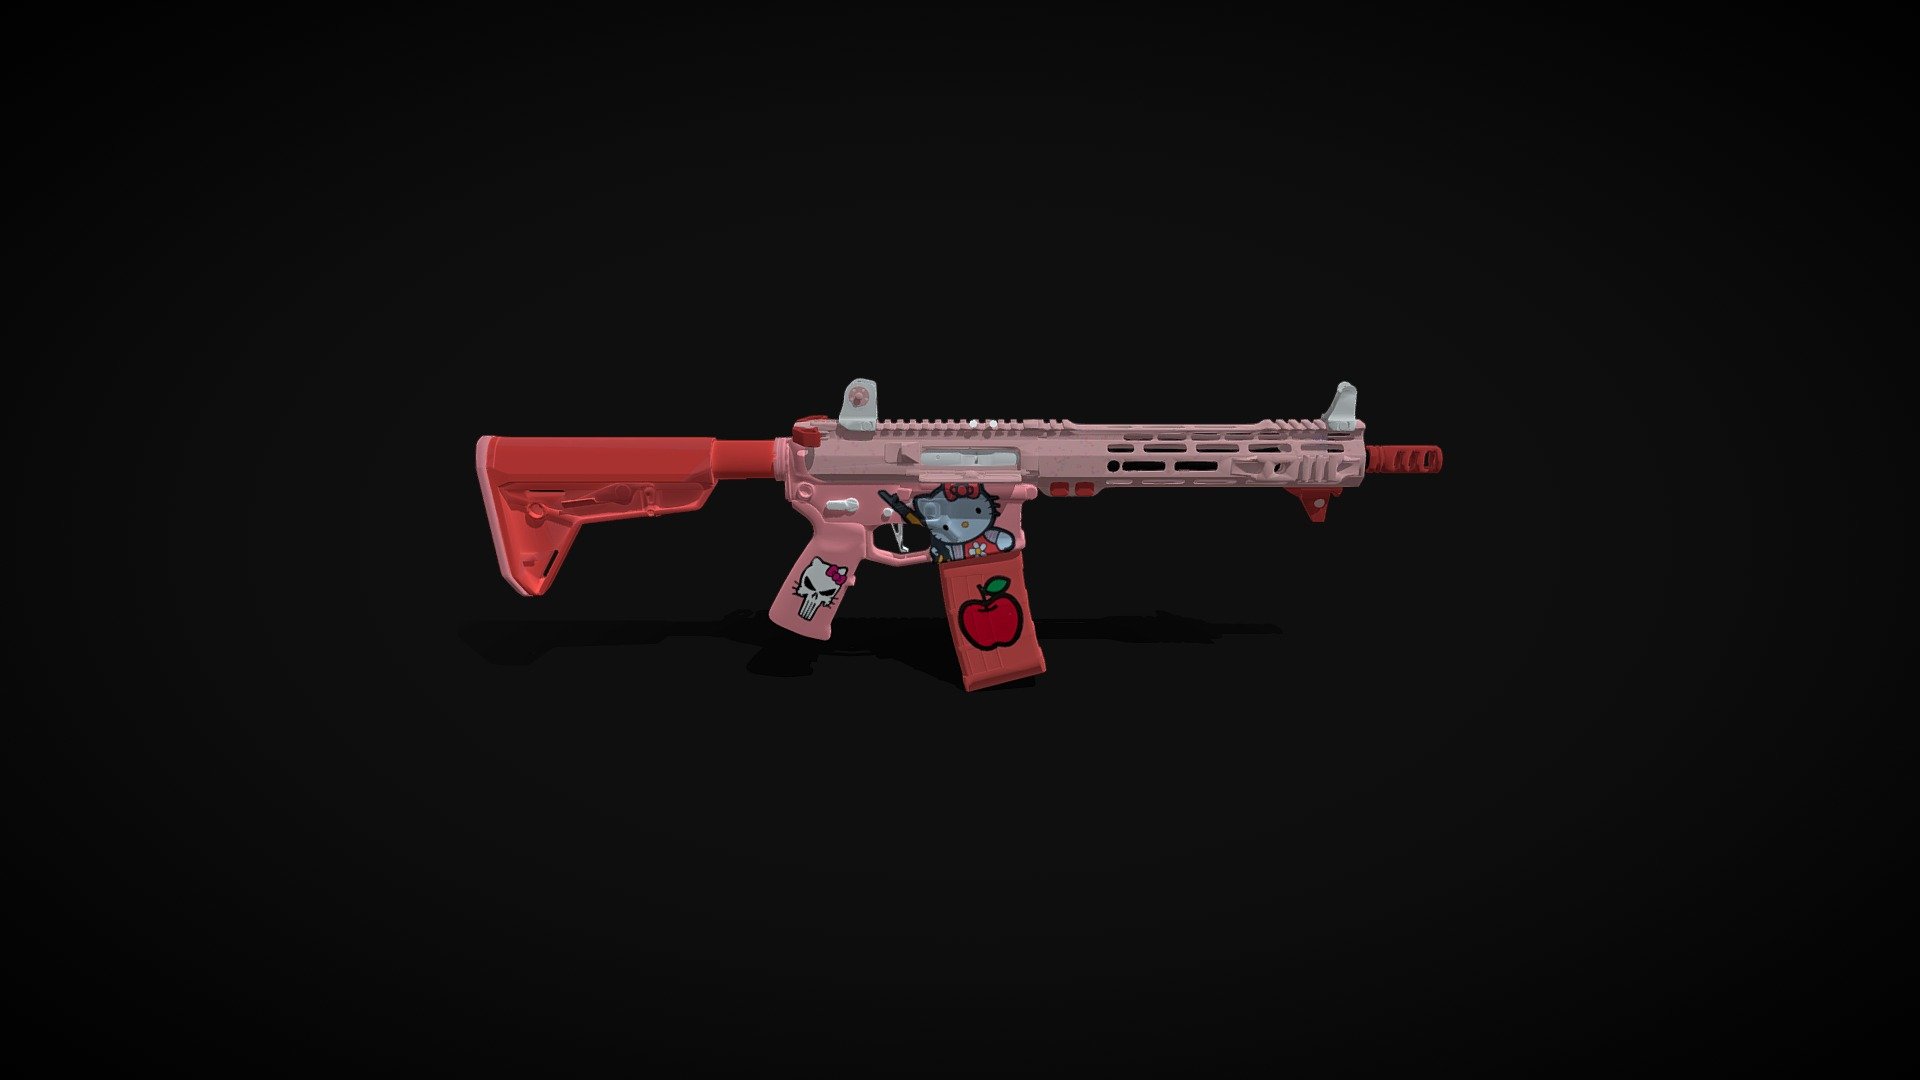 Kitty Retexture using Substance Painter. Original Model by Alex Finsher. https://sketchfab.com/3d-models/slr-ar-15-429b6ef8516b46dca8992e78c4bf7a55

Check this out from zhixson  https://sketchfab.com/3d-models/hello-kitty-soup-thermos-grenade-polycount-fe00f7c91eac4a97bdd95755927ca2f5 its awesome!! - AR15 Alex Finsher - Kitty SP - 3D model by odzta 3d model